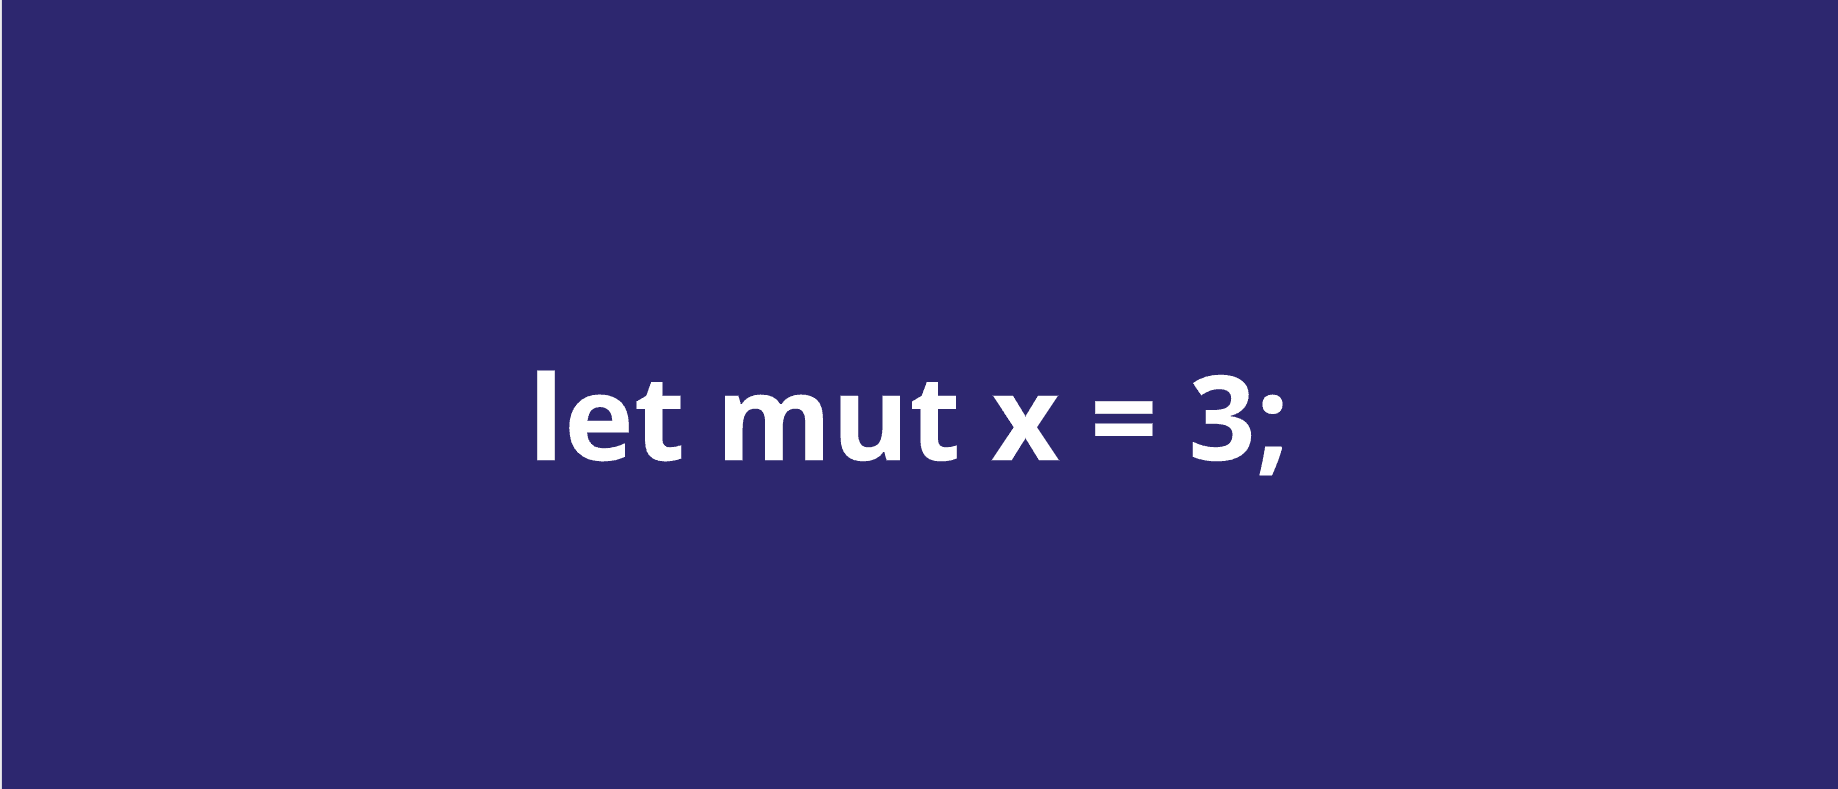 I'm learning Rust and I like writing syntax posts. This one dives into variable declaration and `mut`.